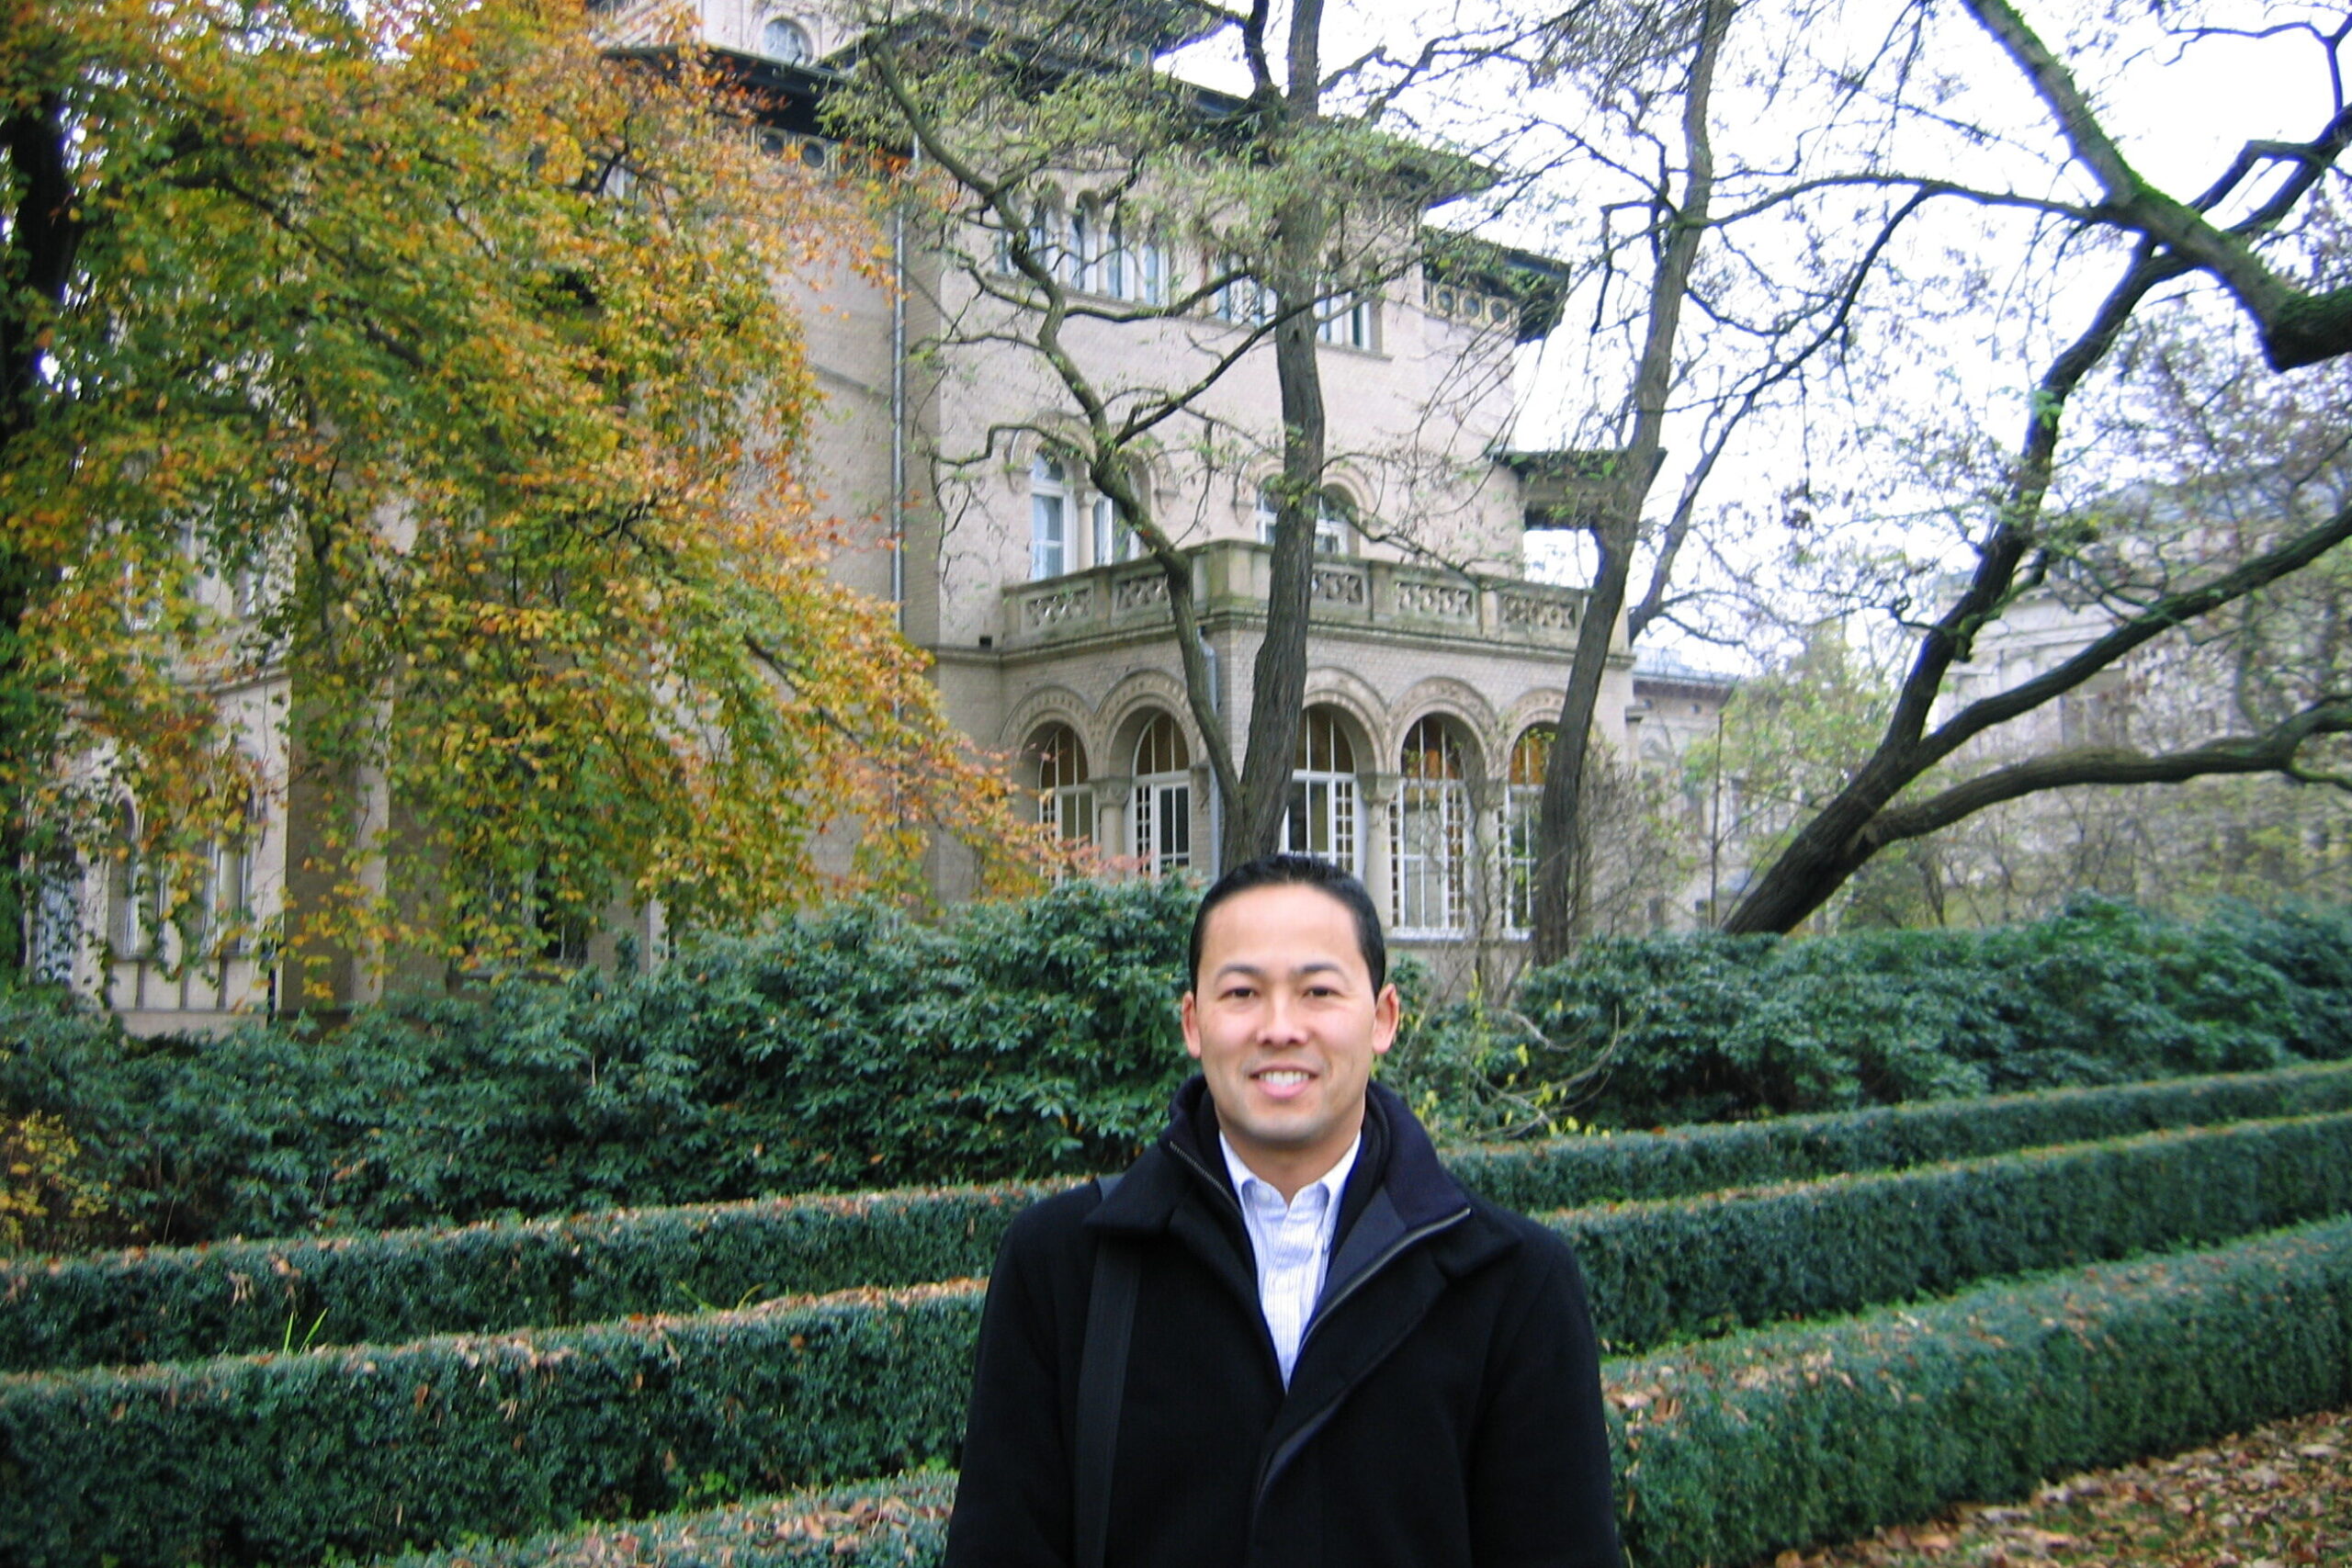 Charles Sasaki standing in front of large building taking part in Fulbright IEA seminar in Germany